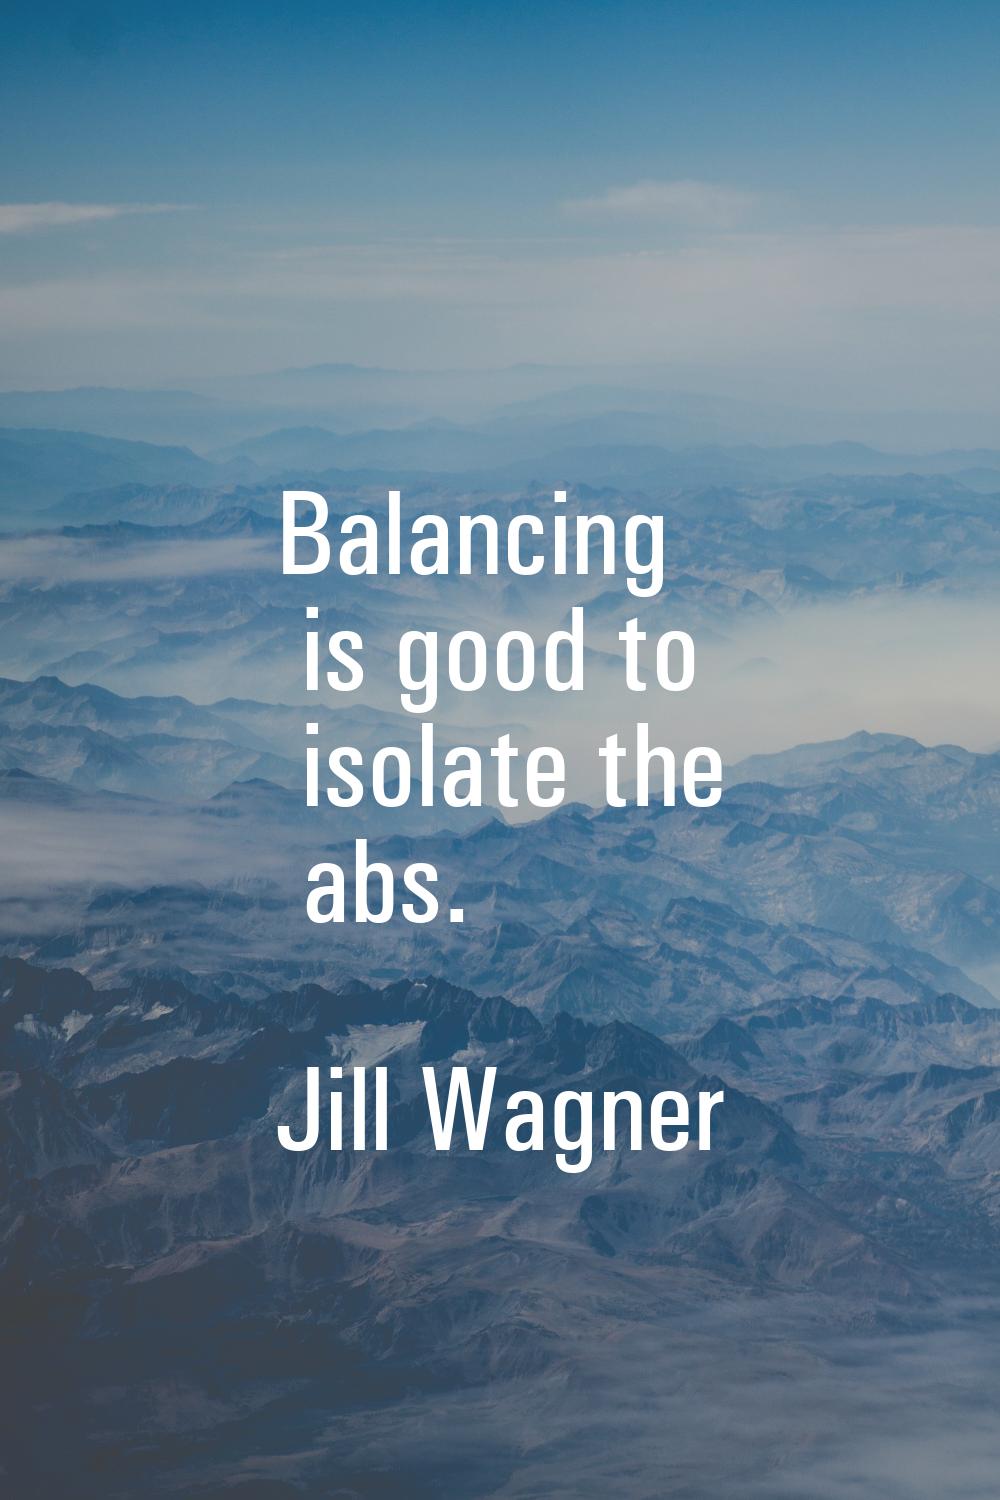 Balancing is good to isolate the abs.